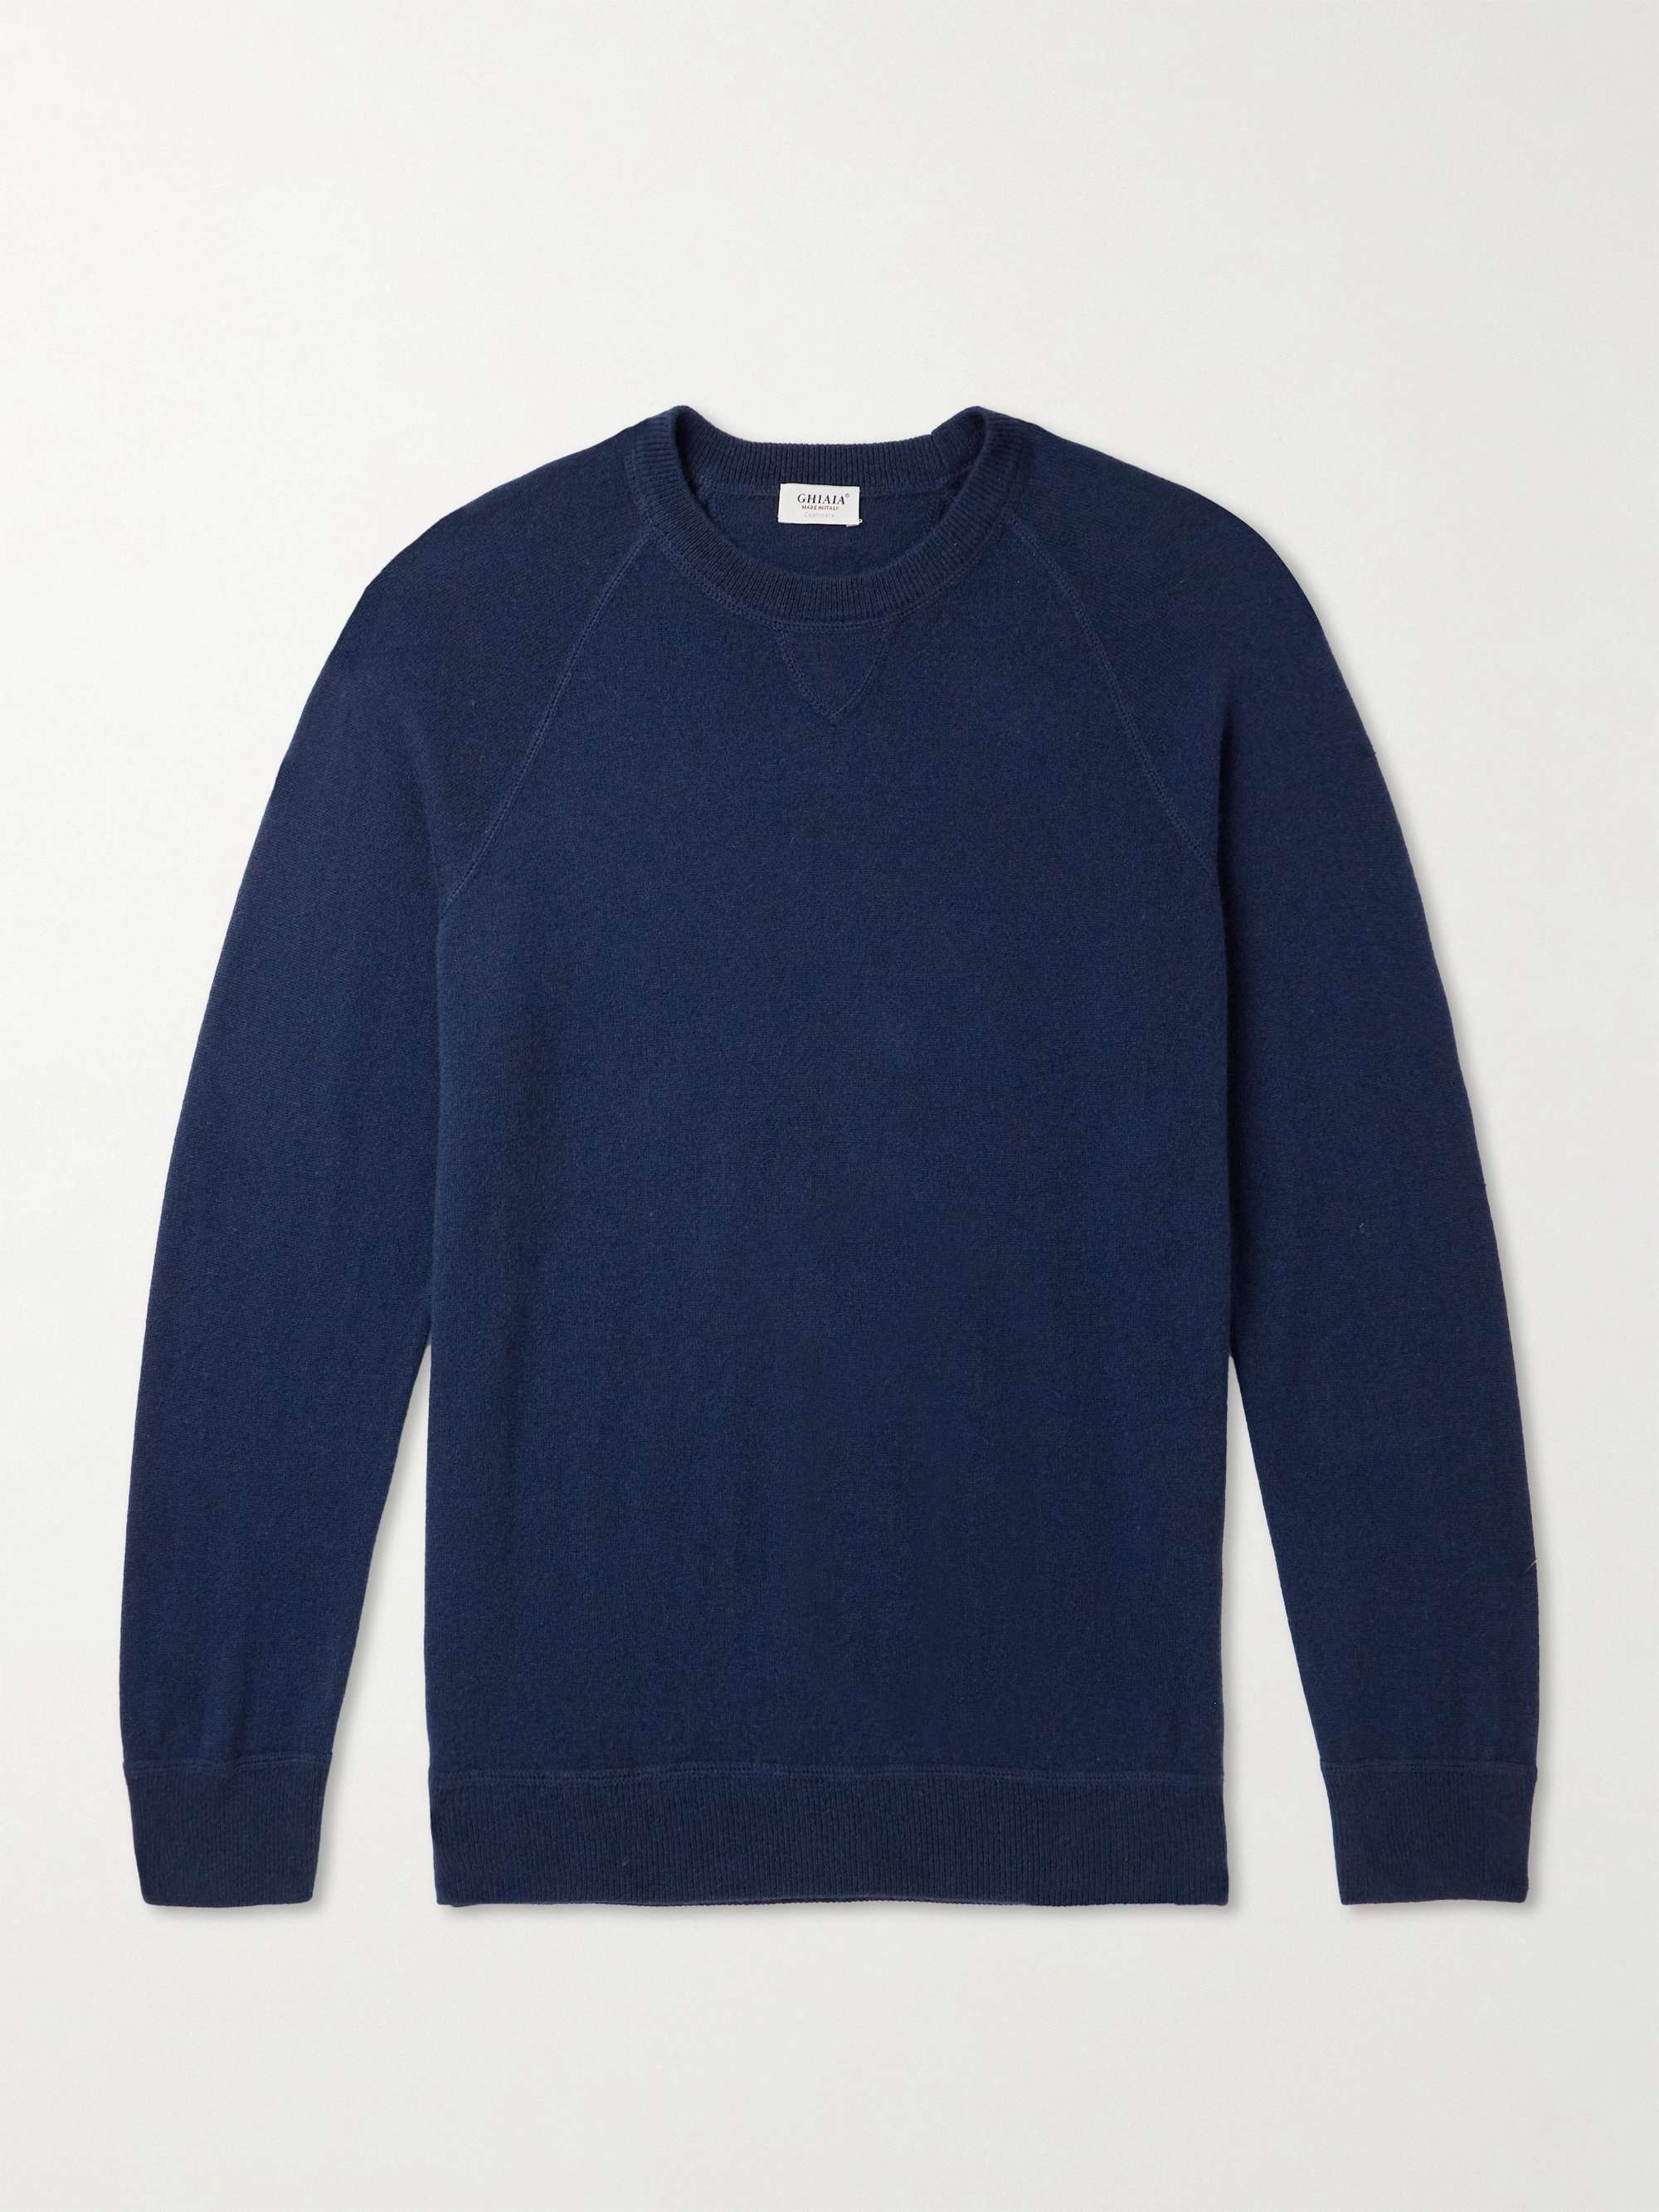 GHIAIA CASHMERE Cahsmere Sweater for Men | MR PORTER